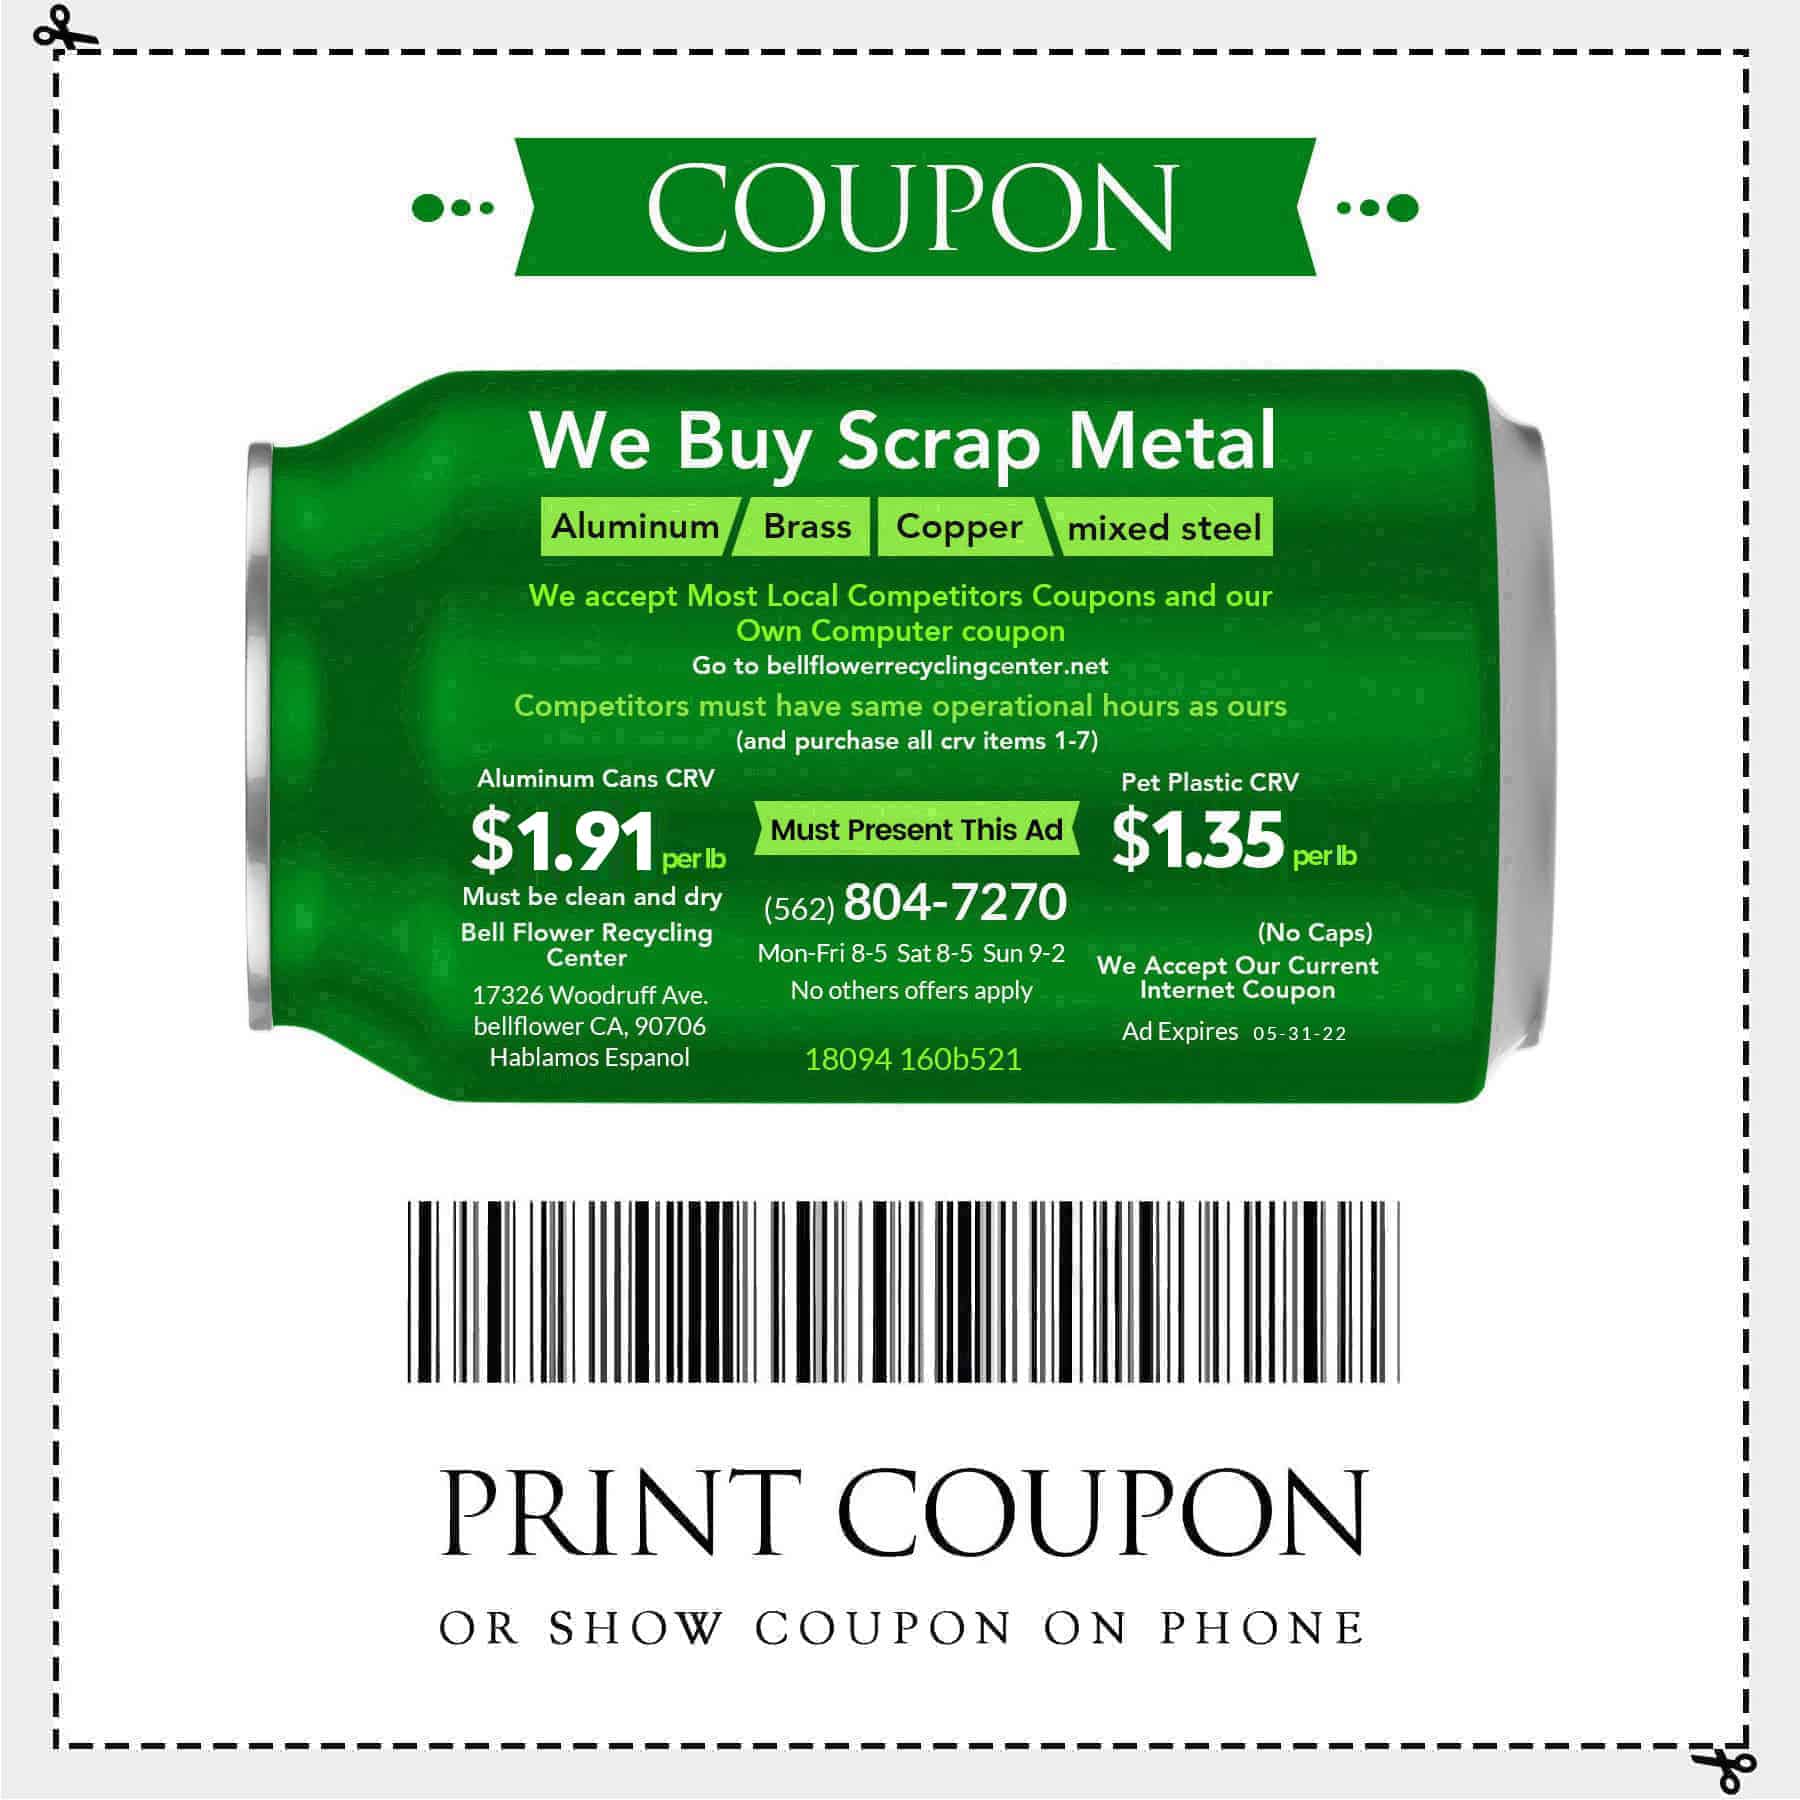 We buy scrap metal Aluminum, Brass, Copper, Mixed steel. We accept most local competitors coupons and our own computer coupon. Competitors must have same operational hours as ours (and purchase all crv items 1-7). One Must present this add. Aluminum Cans CRV $1.91 per lb and Pet Plastic CRV $1.35 per lb.